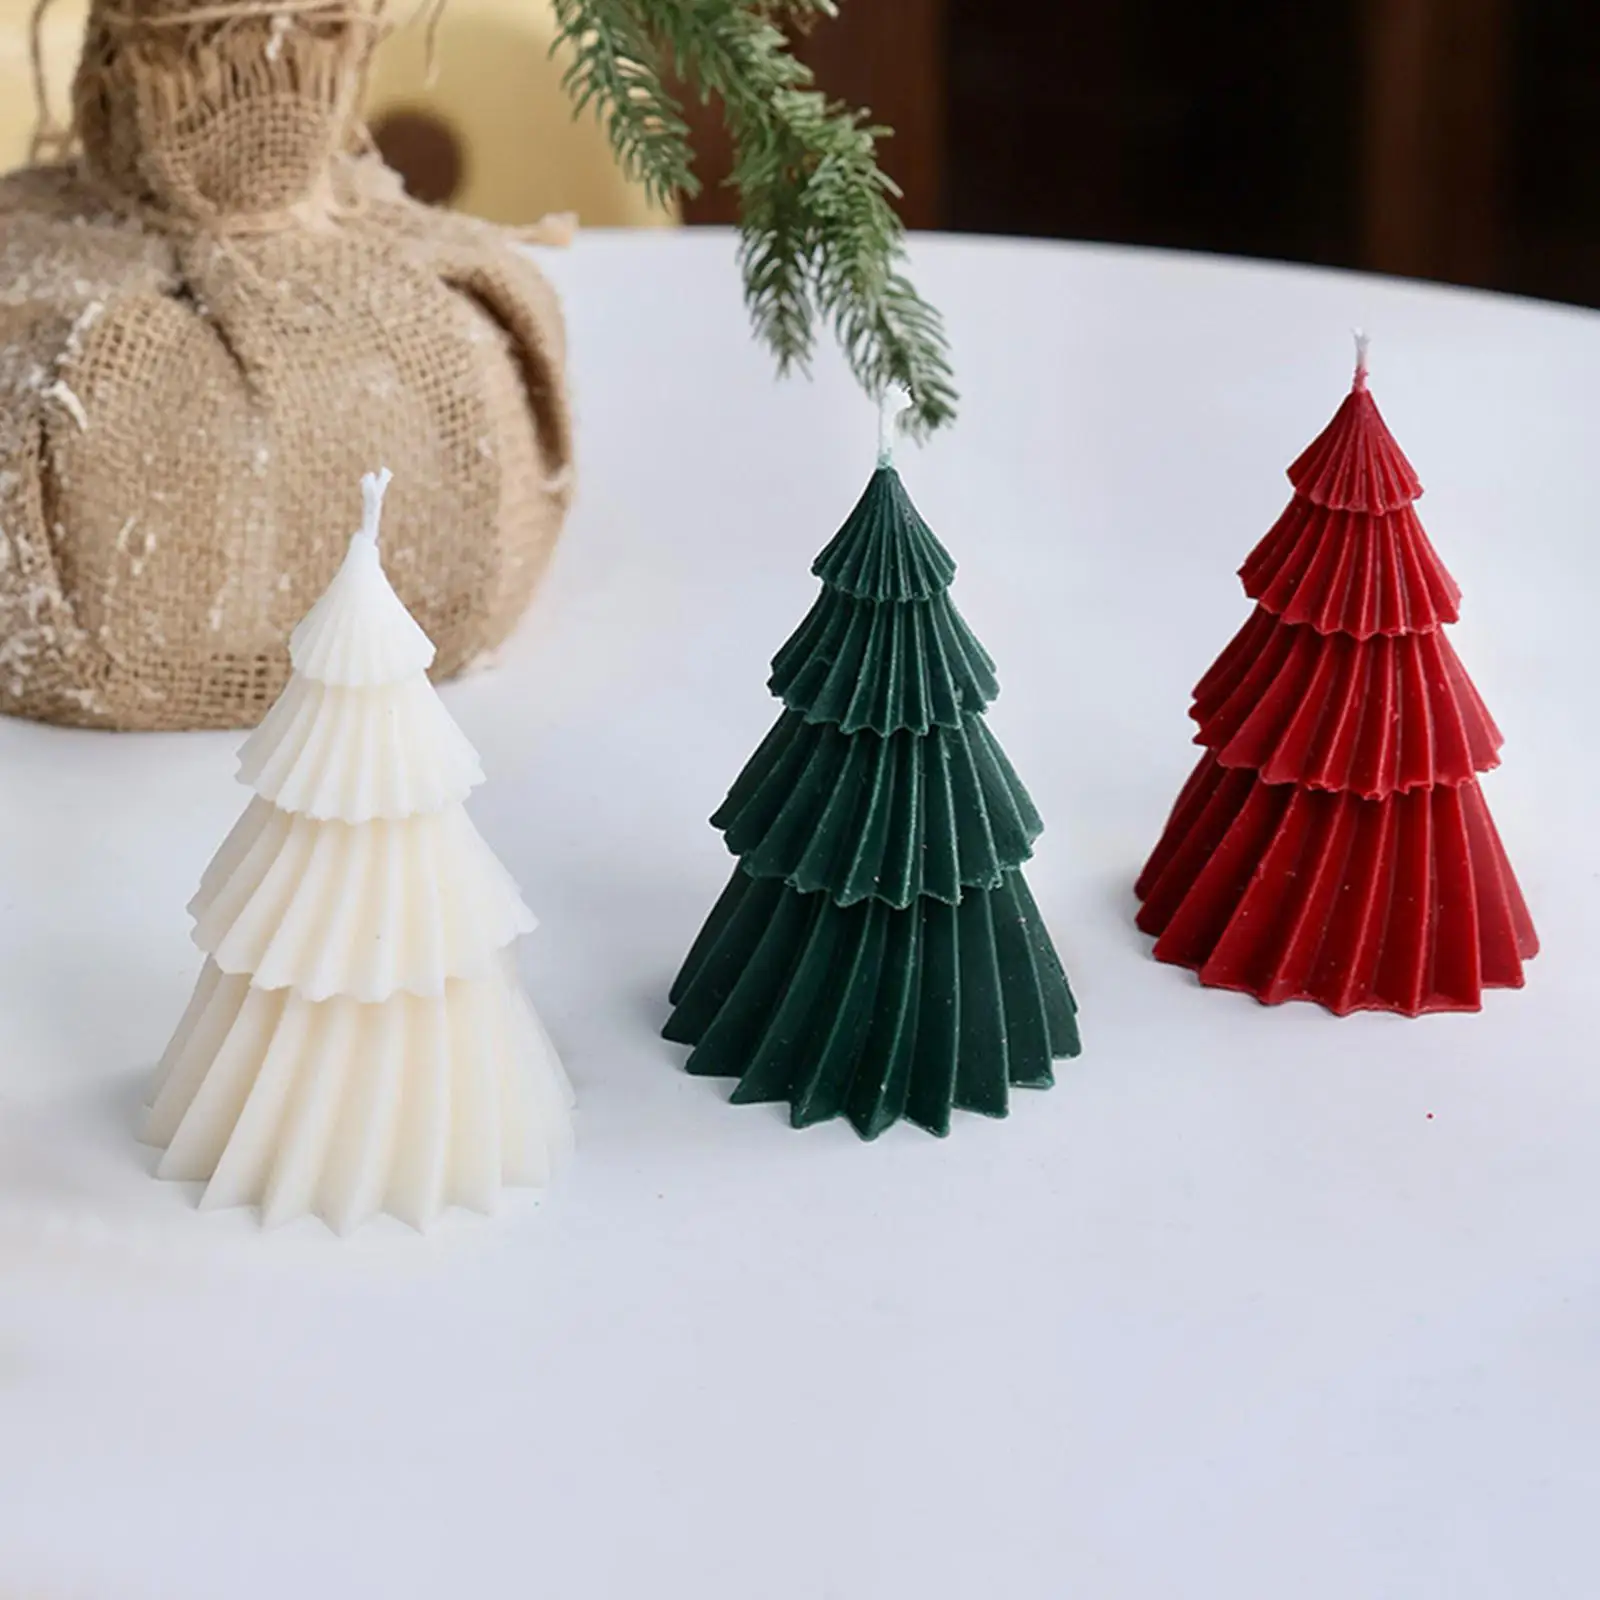 Christmas Tree Scented Candles Rotating Shape Scented Candle Christmas Decoration Gift Holiday Gift Box for Home Ornment